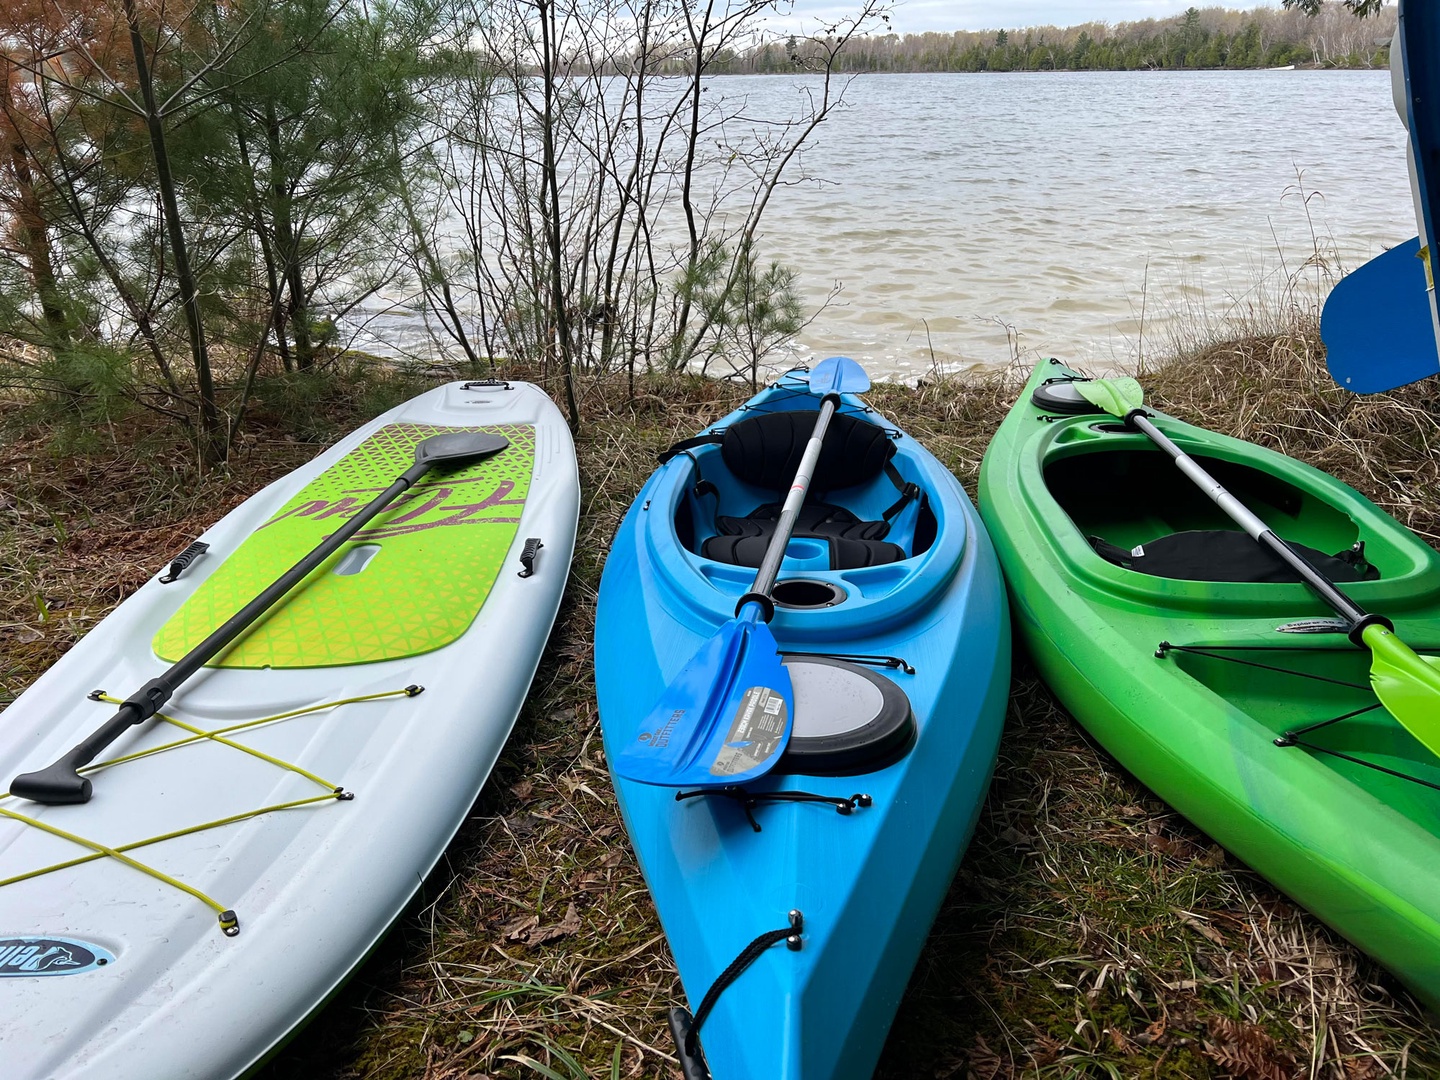 We provide a paddleboard and kayaks for guest use on Nowland Lake!